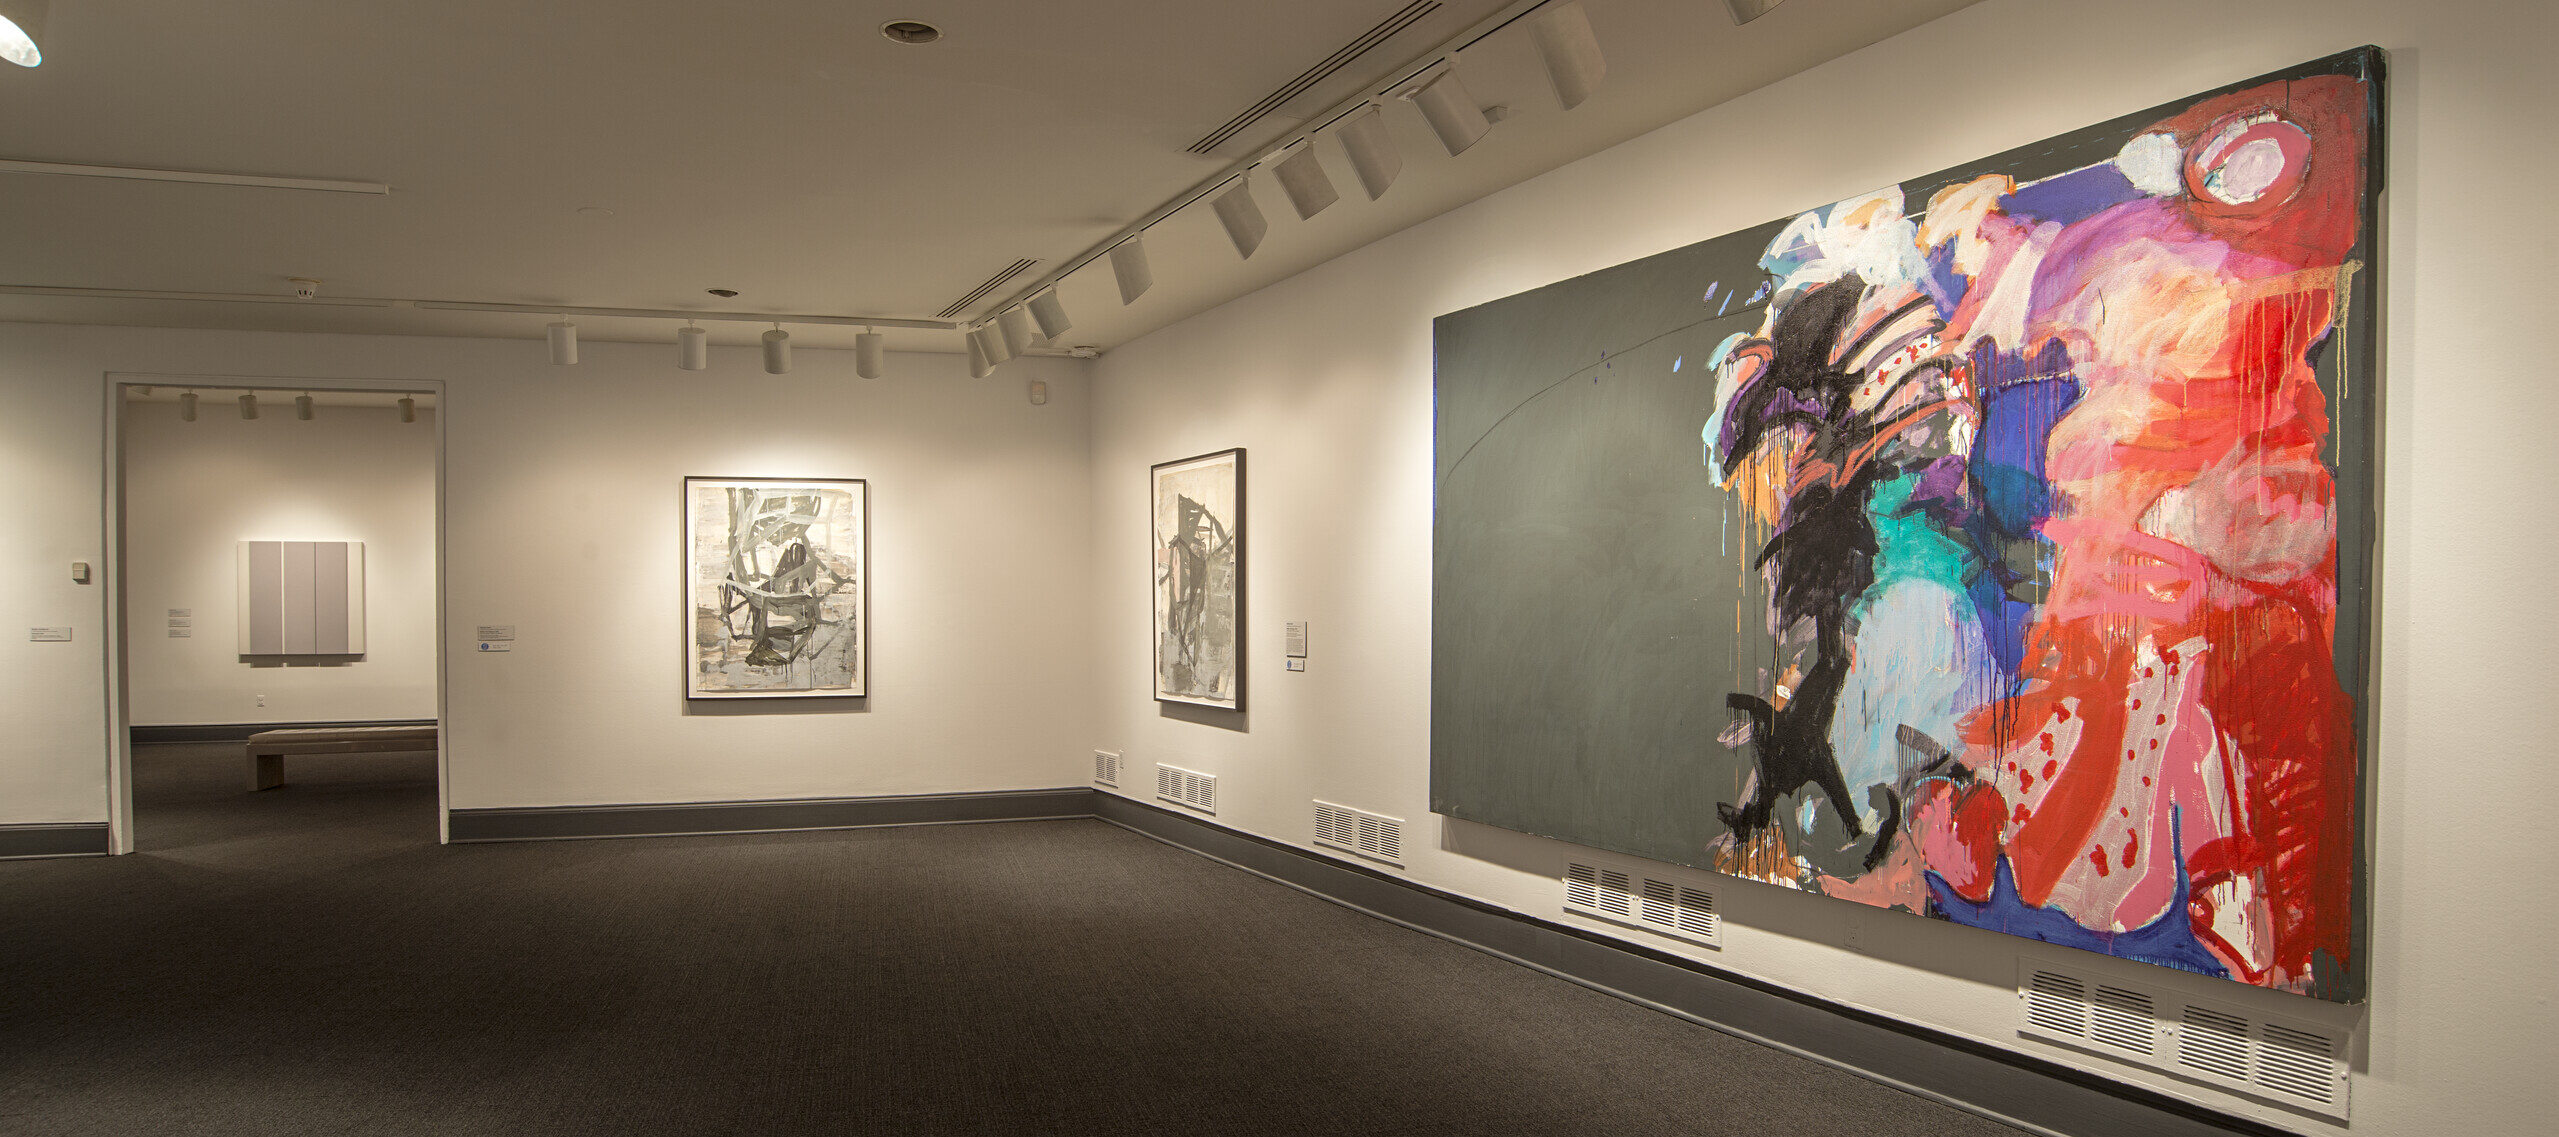 An installation shot of a room with white walls and a large, abstract painting hanging on one of the walls on the right. The large painting is comprised of colorful brushstrokes against a dark gray background.